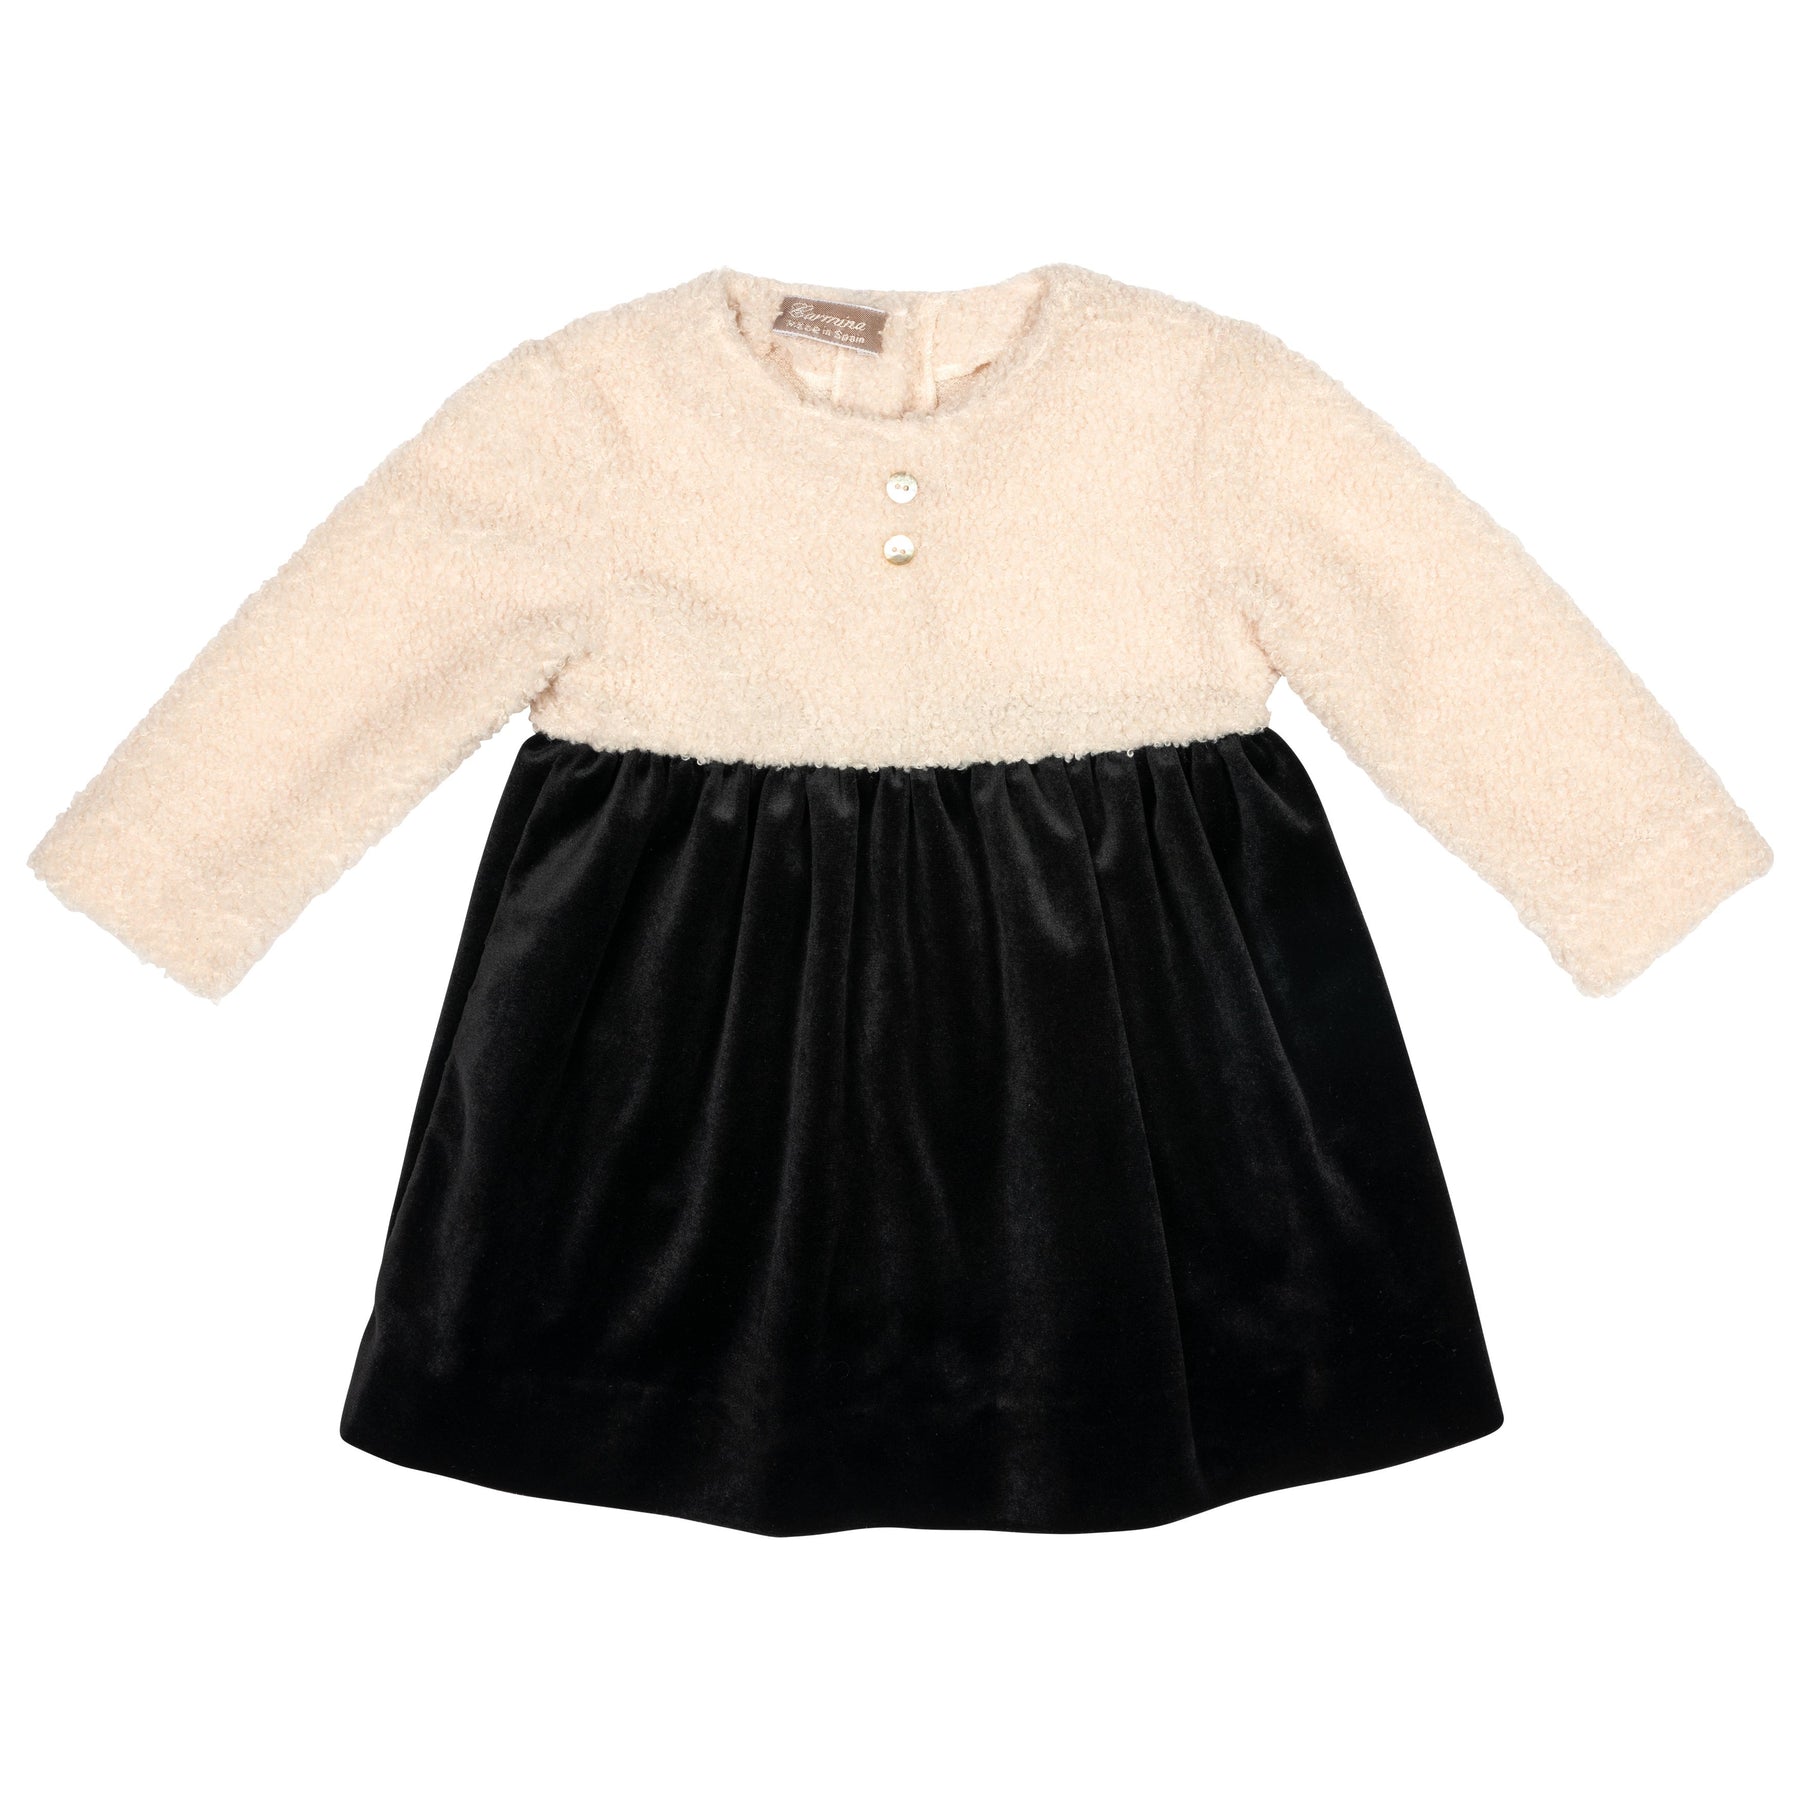 Carmina Dress exclusive at little loungers for Girls - Oat Sherpa Top